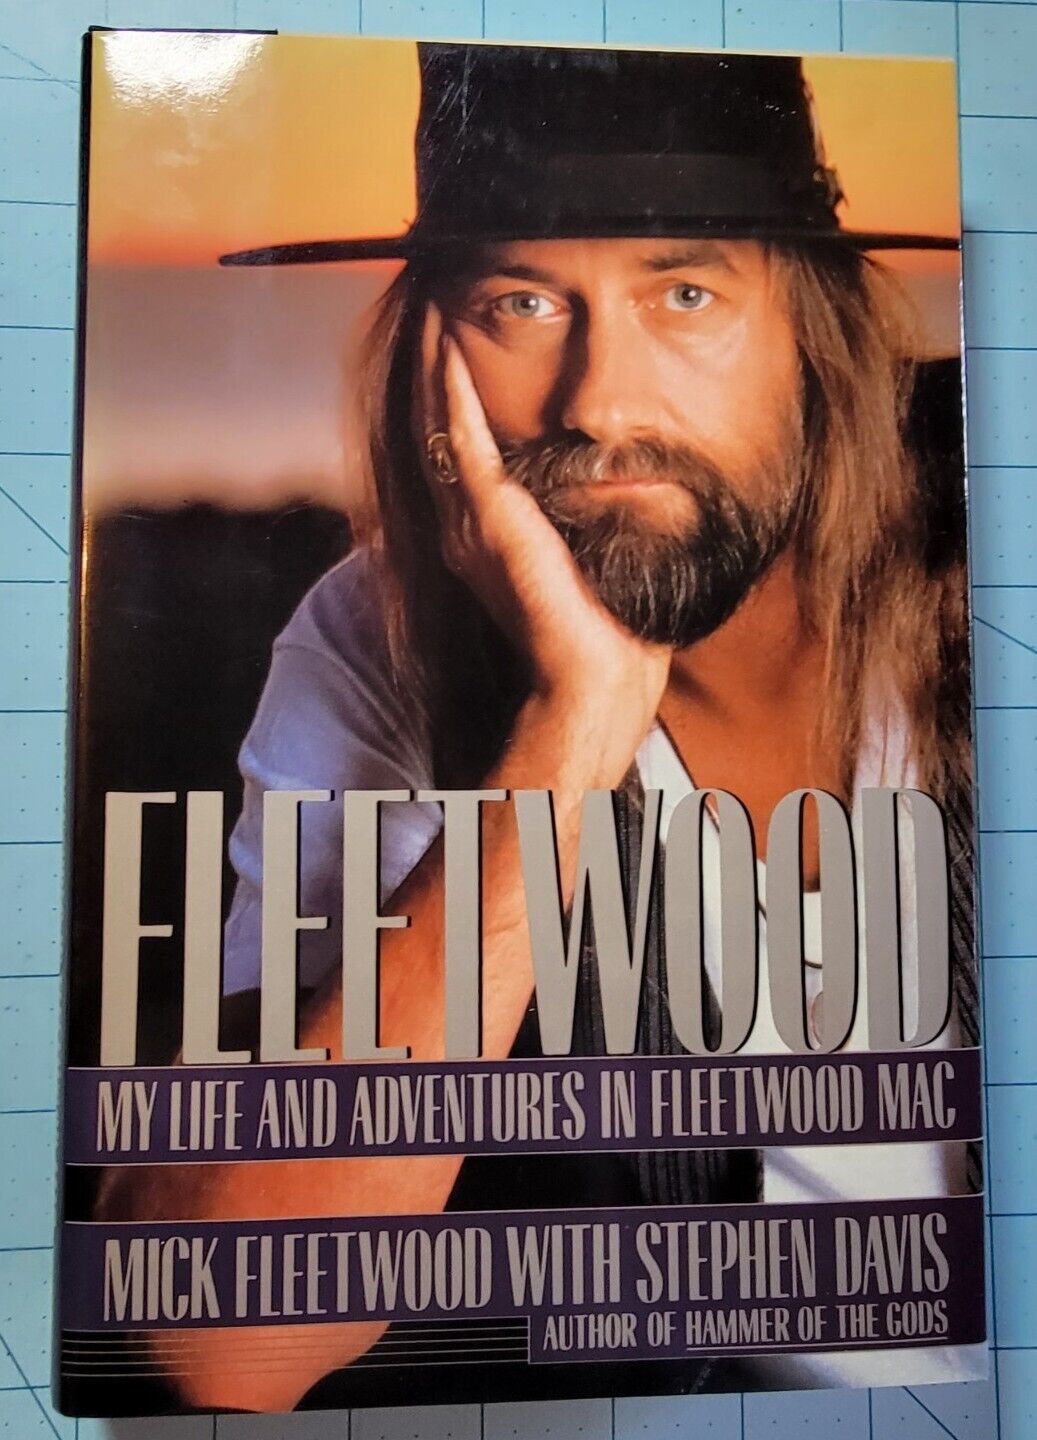 Fleetwood 1990 Hardcover Book By Mick Fleetwood - Pre-Owned With  